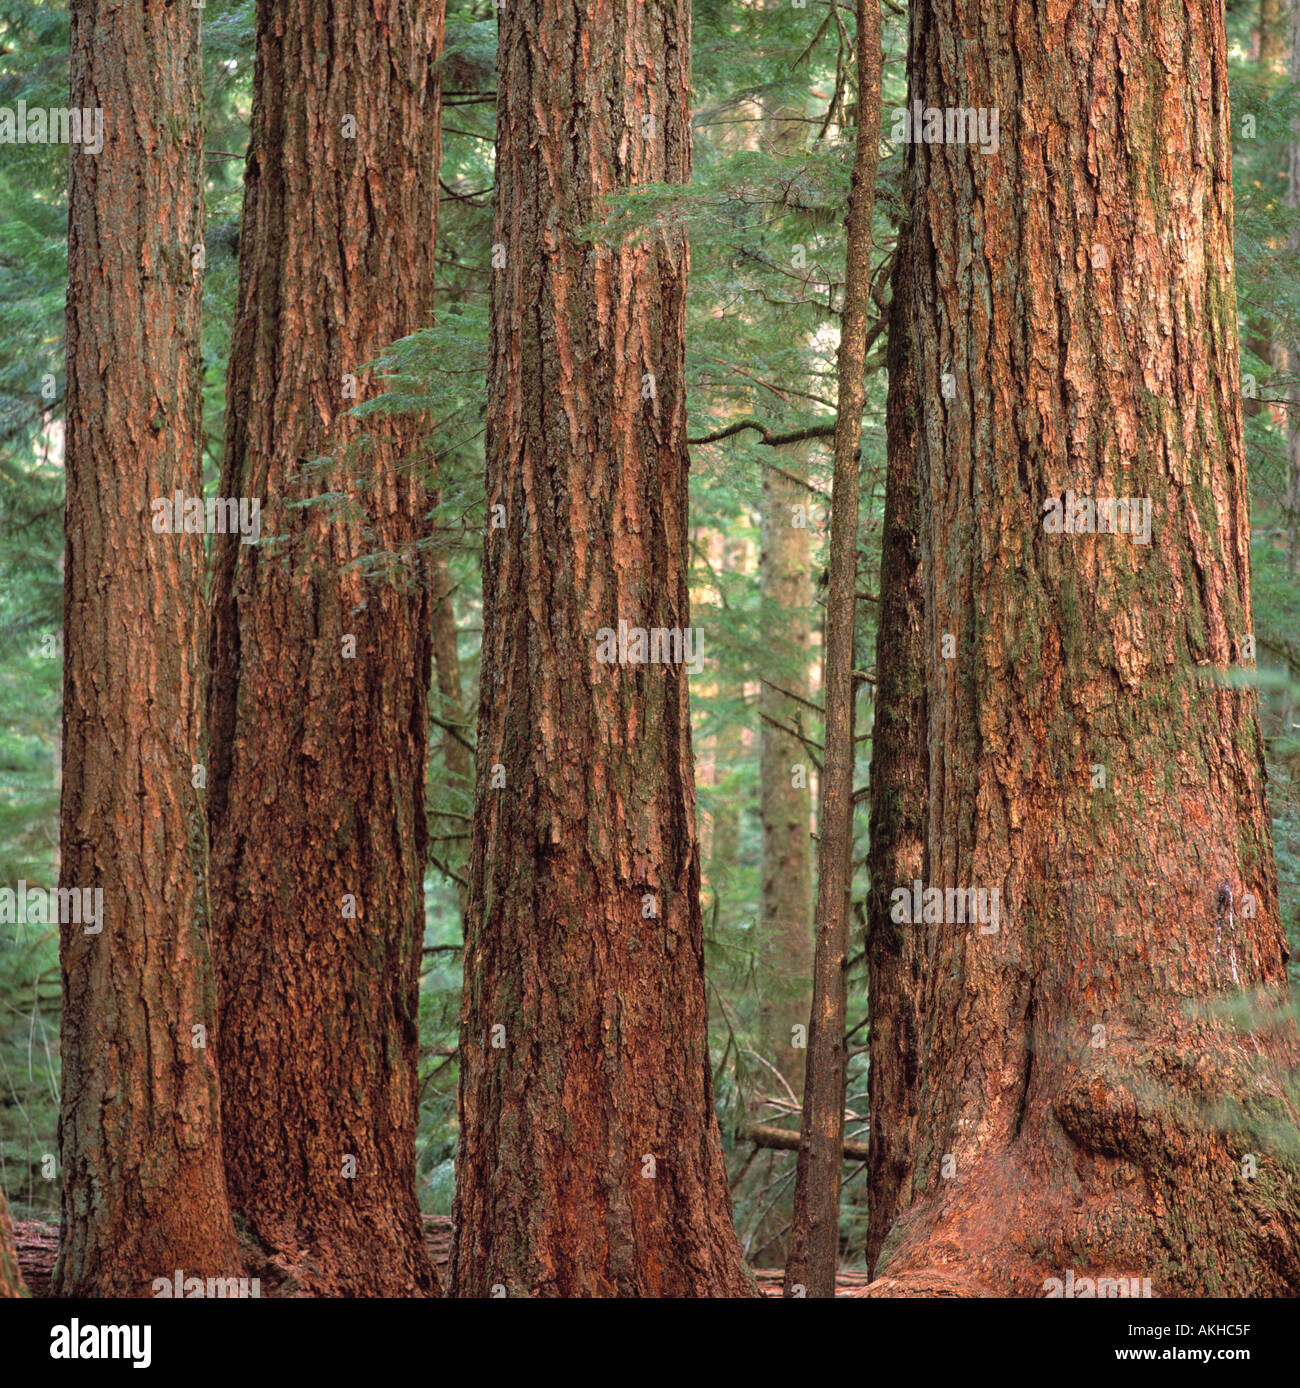 Douglas Fir Trees (Pseudotsuga menziesii) grow in Old Growth Temperate Rainforest, Pacific West Coast, British Columbia, Canada Stock Photo